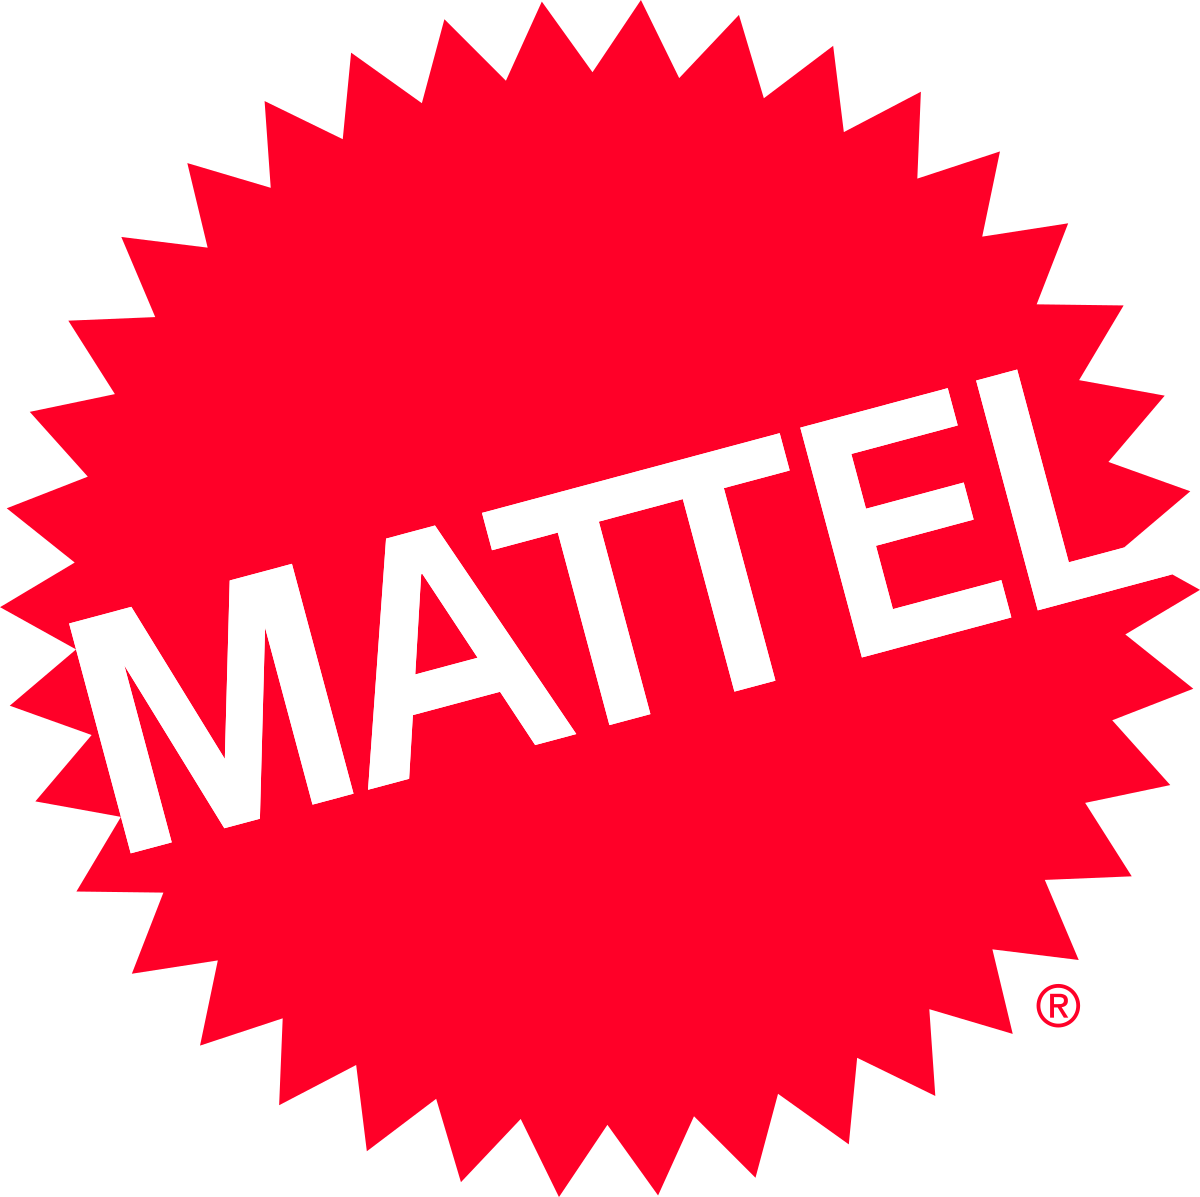 The iconic red and white Mattel logo. 